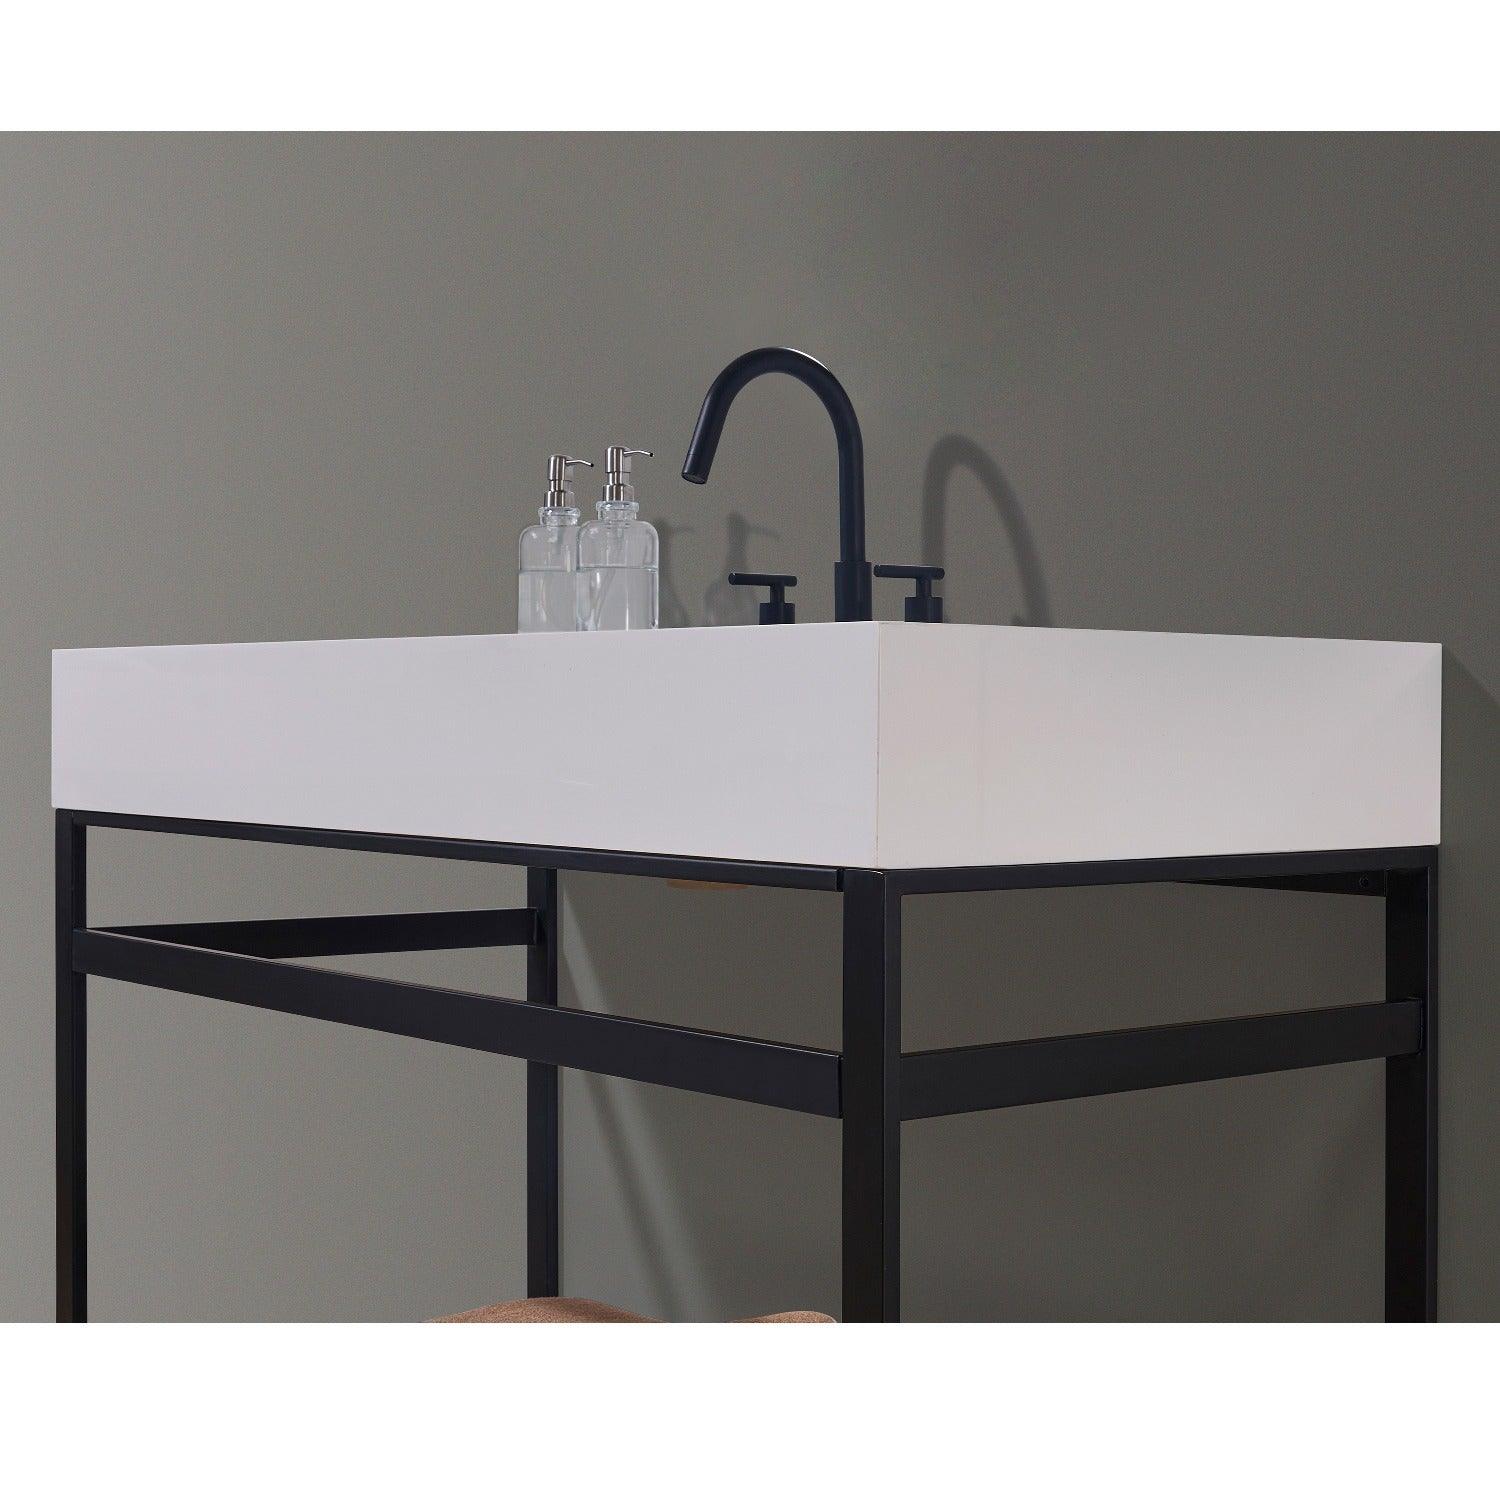 Altair Edolo Single Stainless Steel Vanity Console in Matt Black with Snow White Stone Countertop and Optional Mirror - Sea & Stone Bath